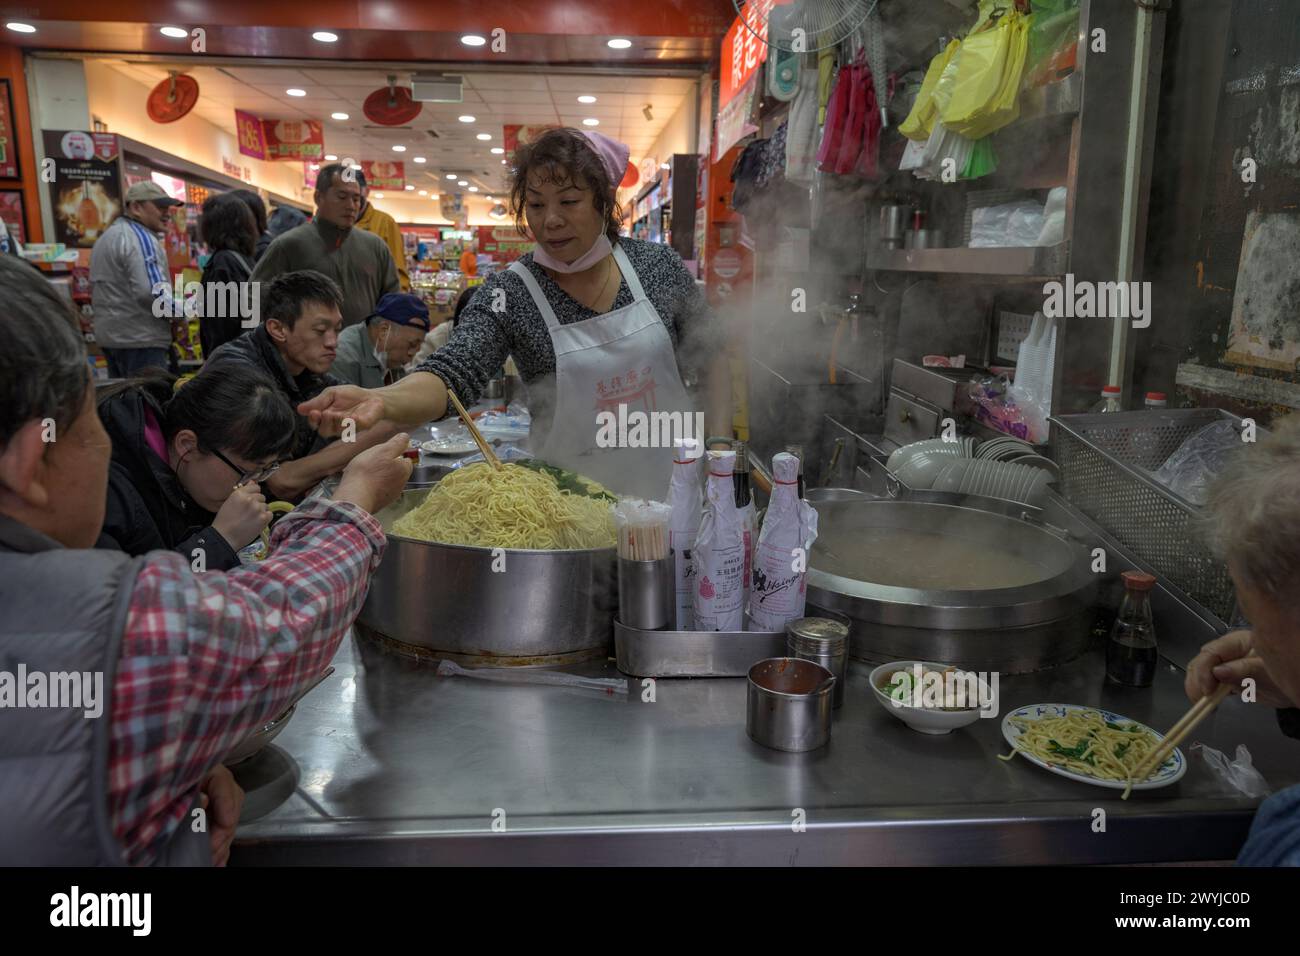 A woman serves noodles at a busy market stall, taking money from a customer in a bustling environment Stock Photo